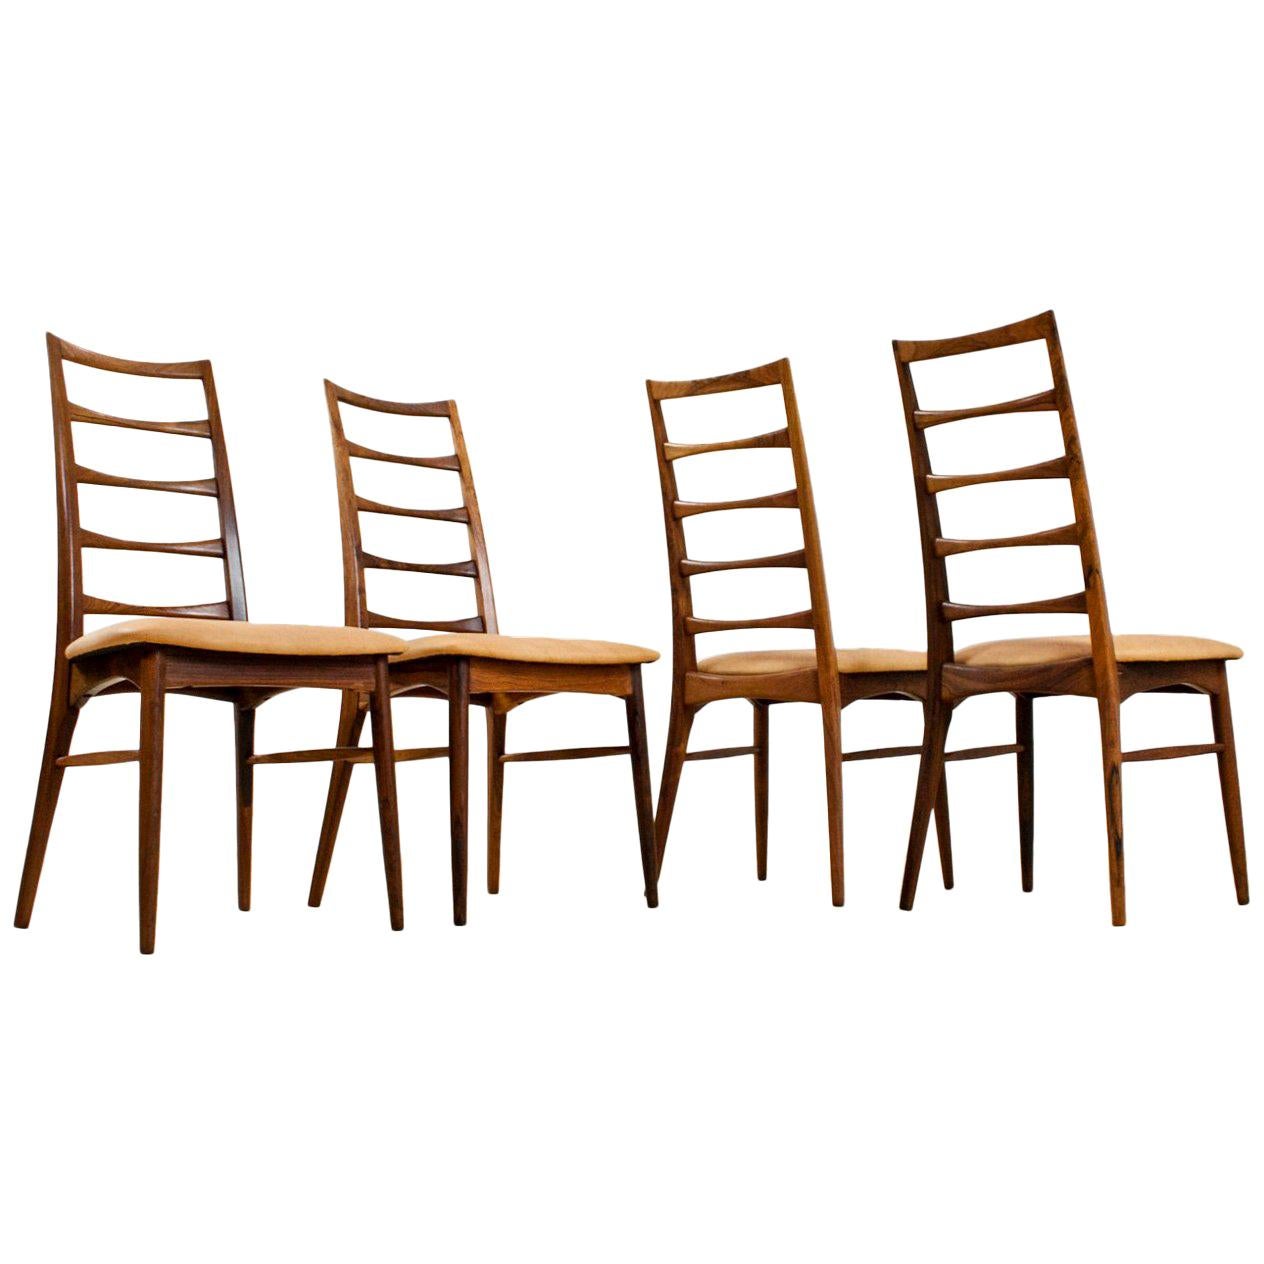 Mid-Century Modern Niels Kofoed Rosewood and Leather Dining Chairs Set of 4 For Sale